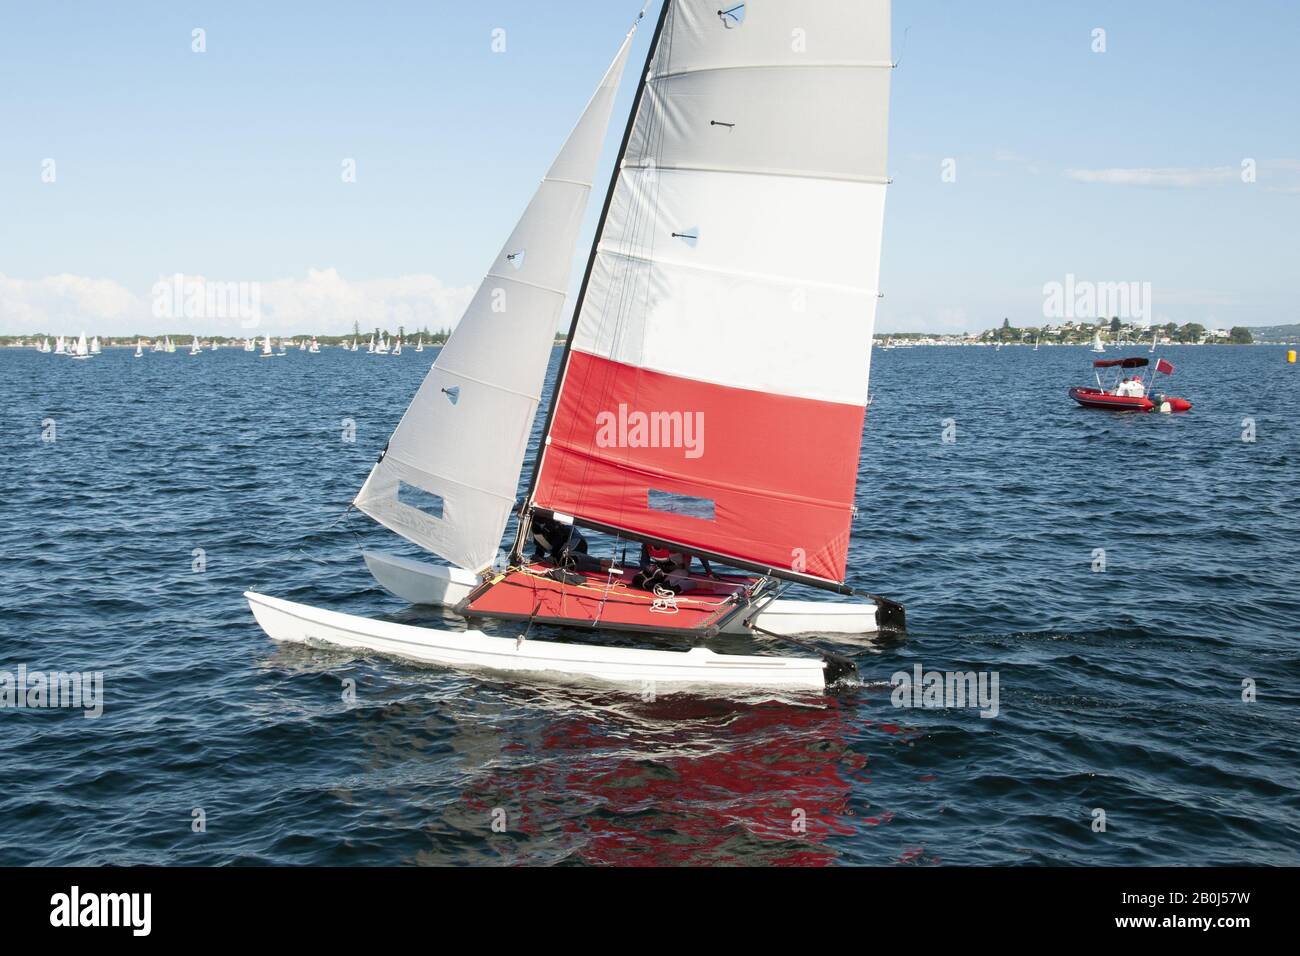 Children Sailing a catamaran sailboat at speed with one hull airborne. Skilled teamwork by junior sailors racing in school championship regatta. Phot Stock Photo